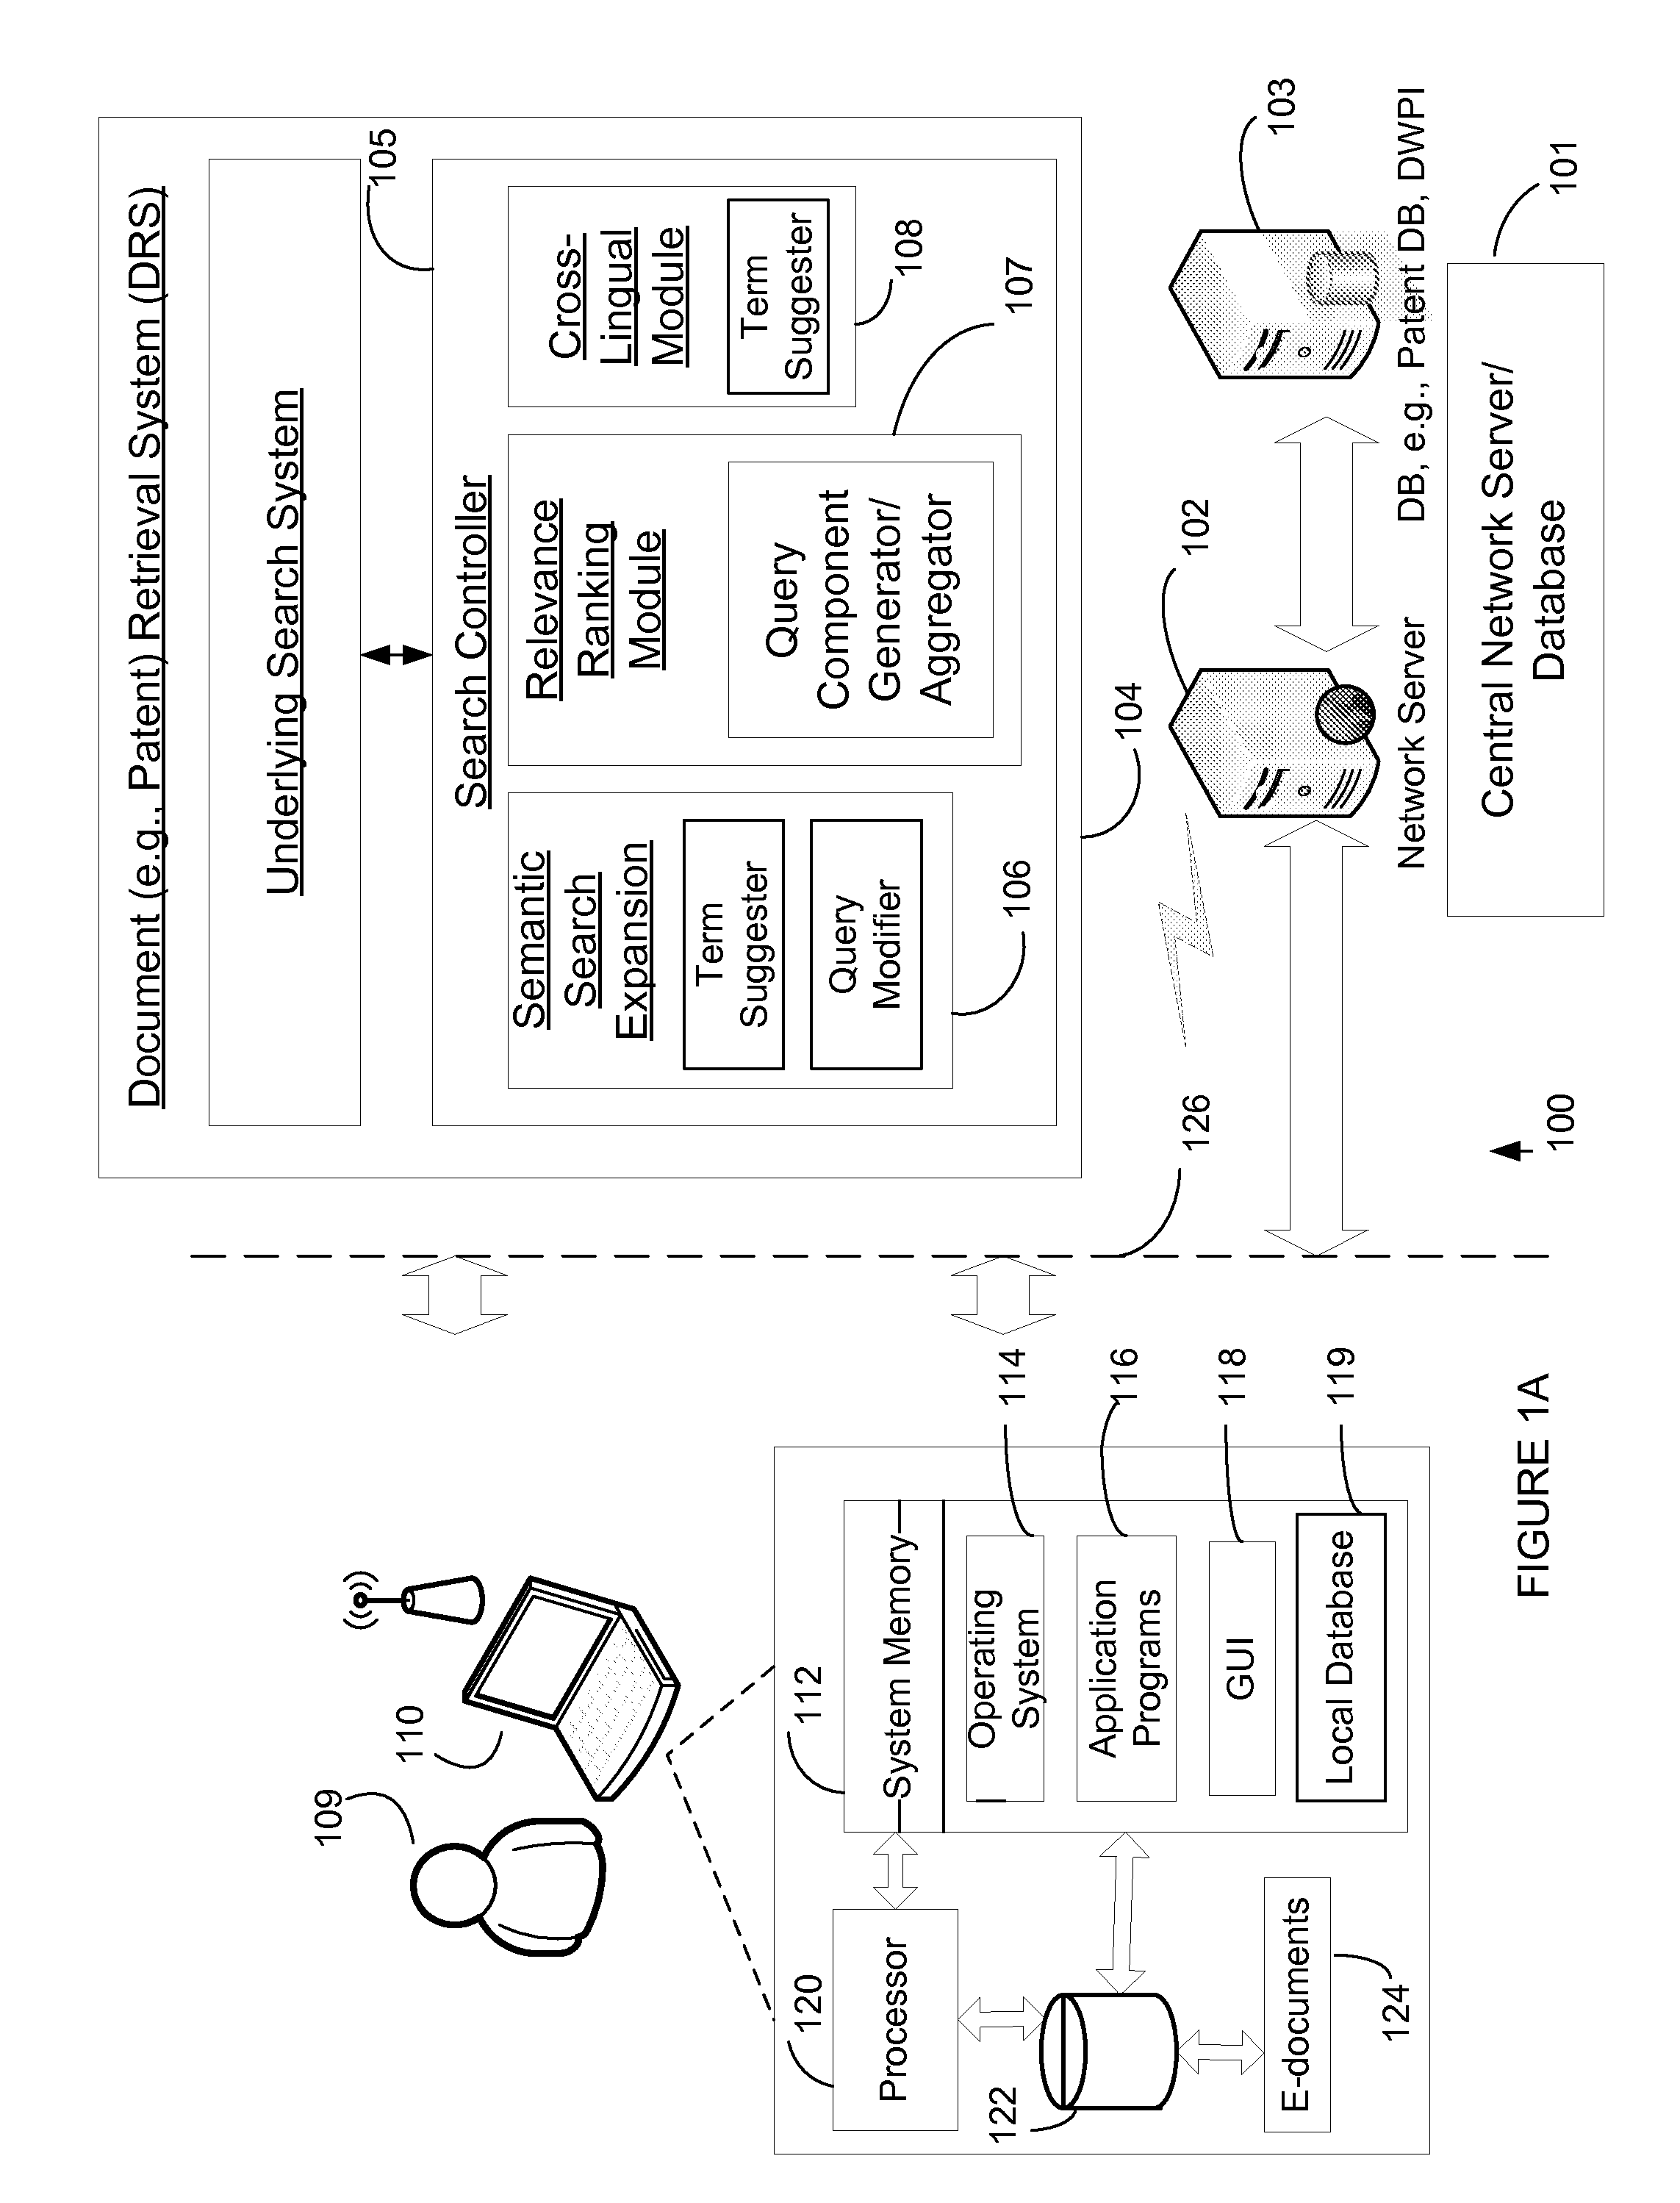 Method, system and software for searching, identifying, retrieving and presenting electronic documents